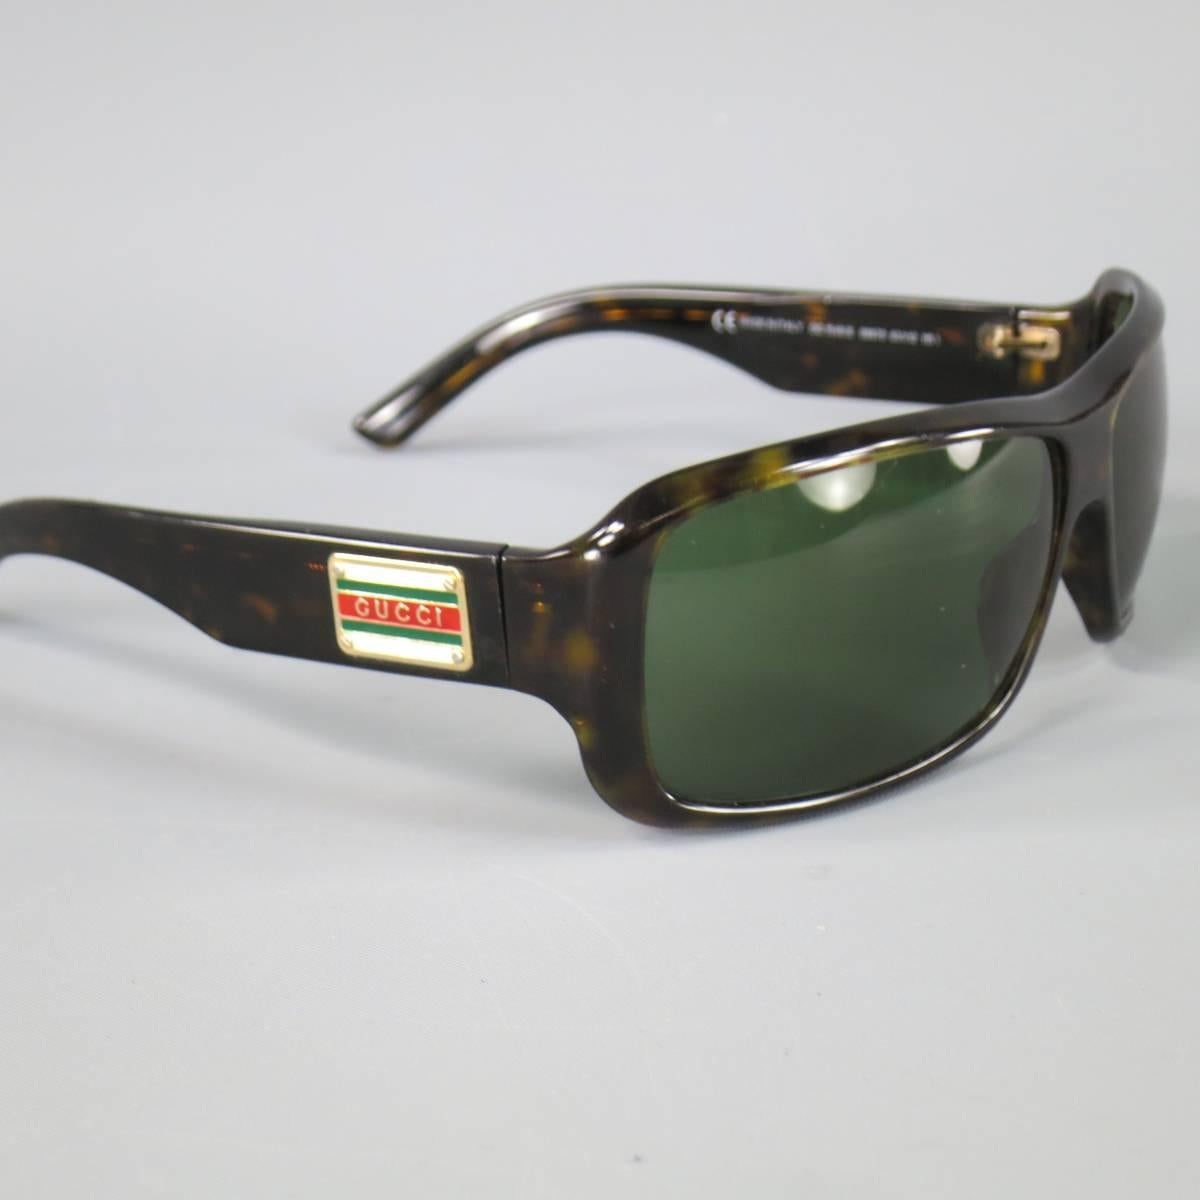 Vintage GUCCI sunglasses in a dark brown tortoiseshell acetate featuring a square green lens and thick arms with gold retro Gucci logo. Minor wear. As-Is. Made in Italy.
 
Fair Pre-Owned Condition.
Marked: 1548 08670 63 12 115/
 
63 x 12 x 115 mm